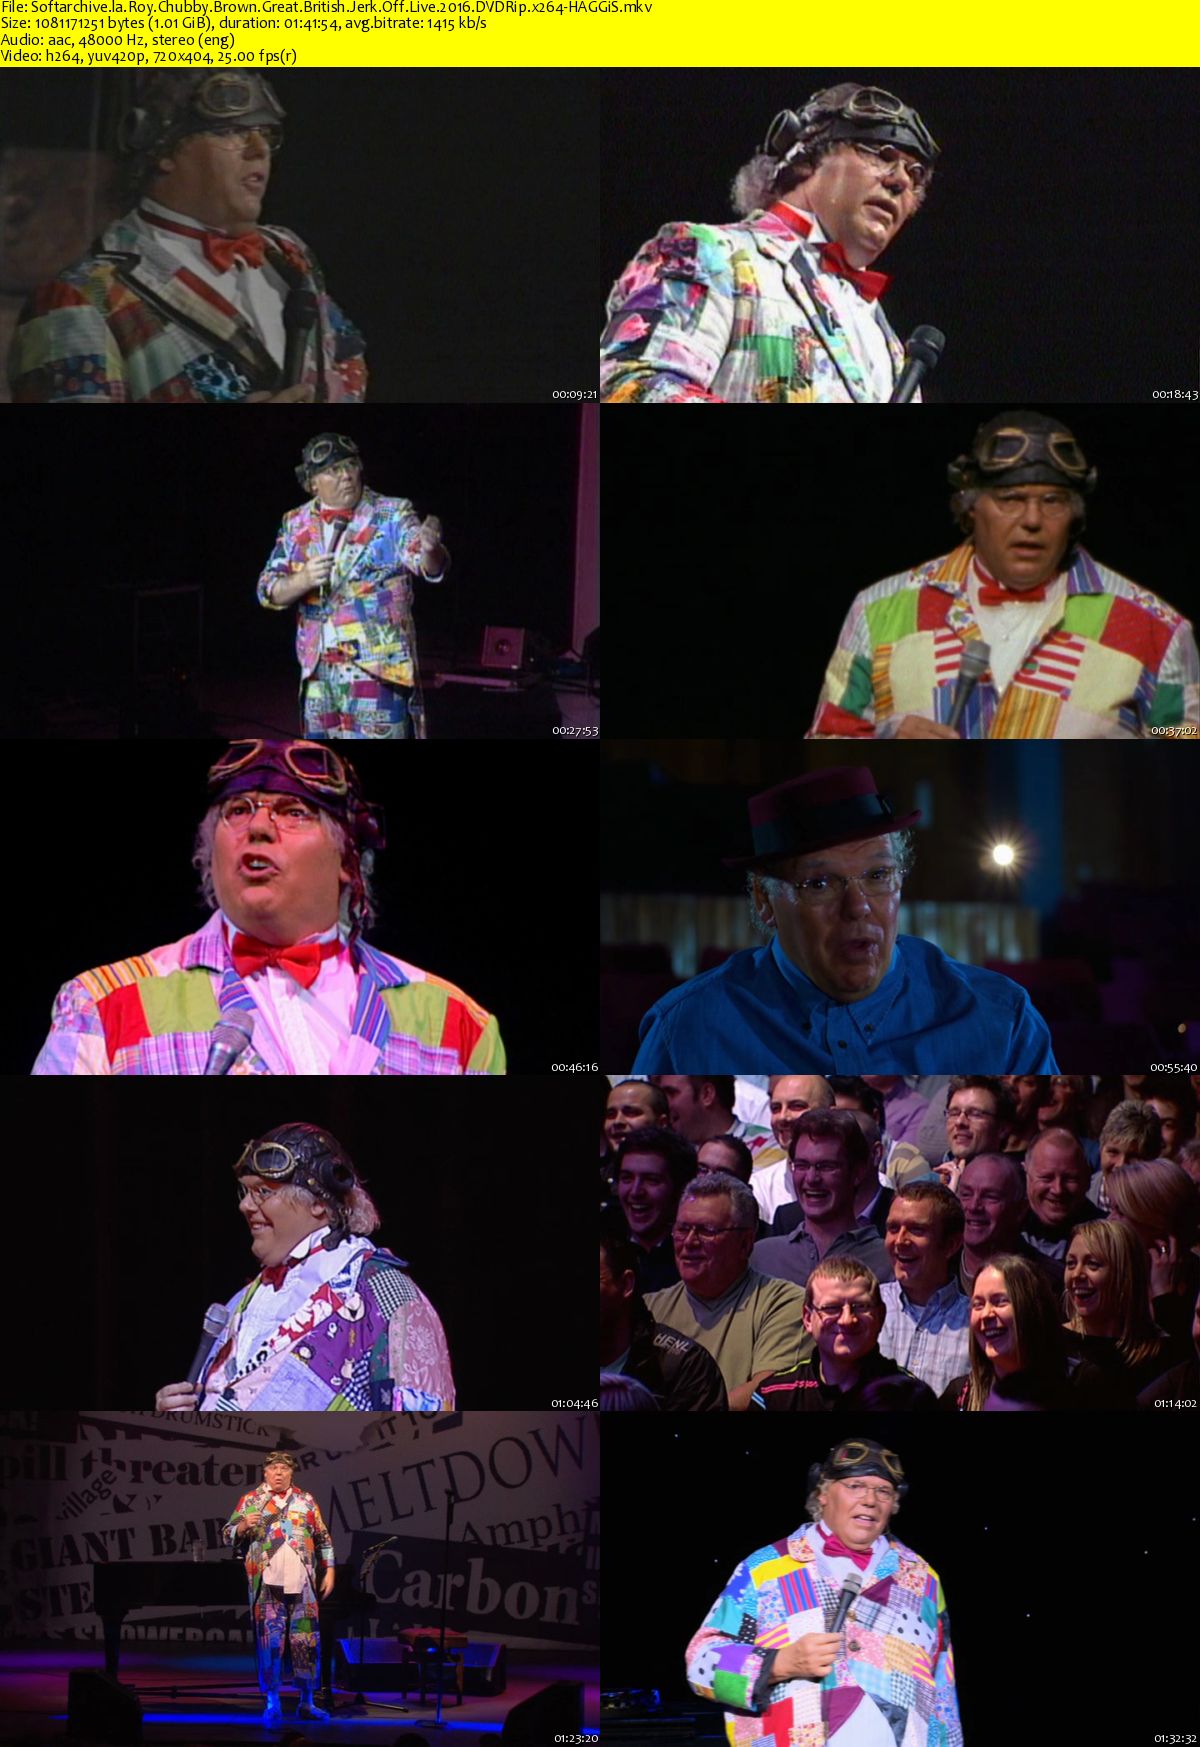 Download Roy Chubby Brown